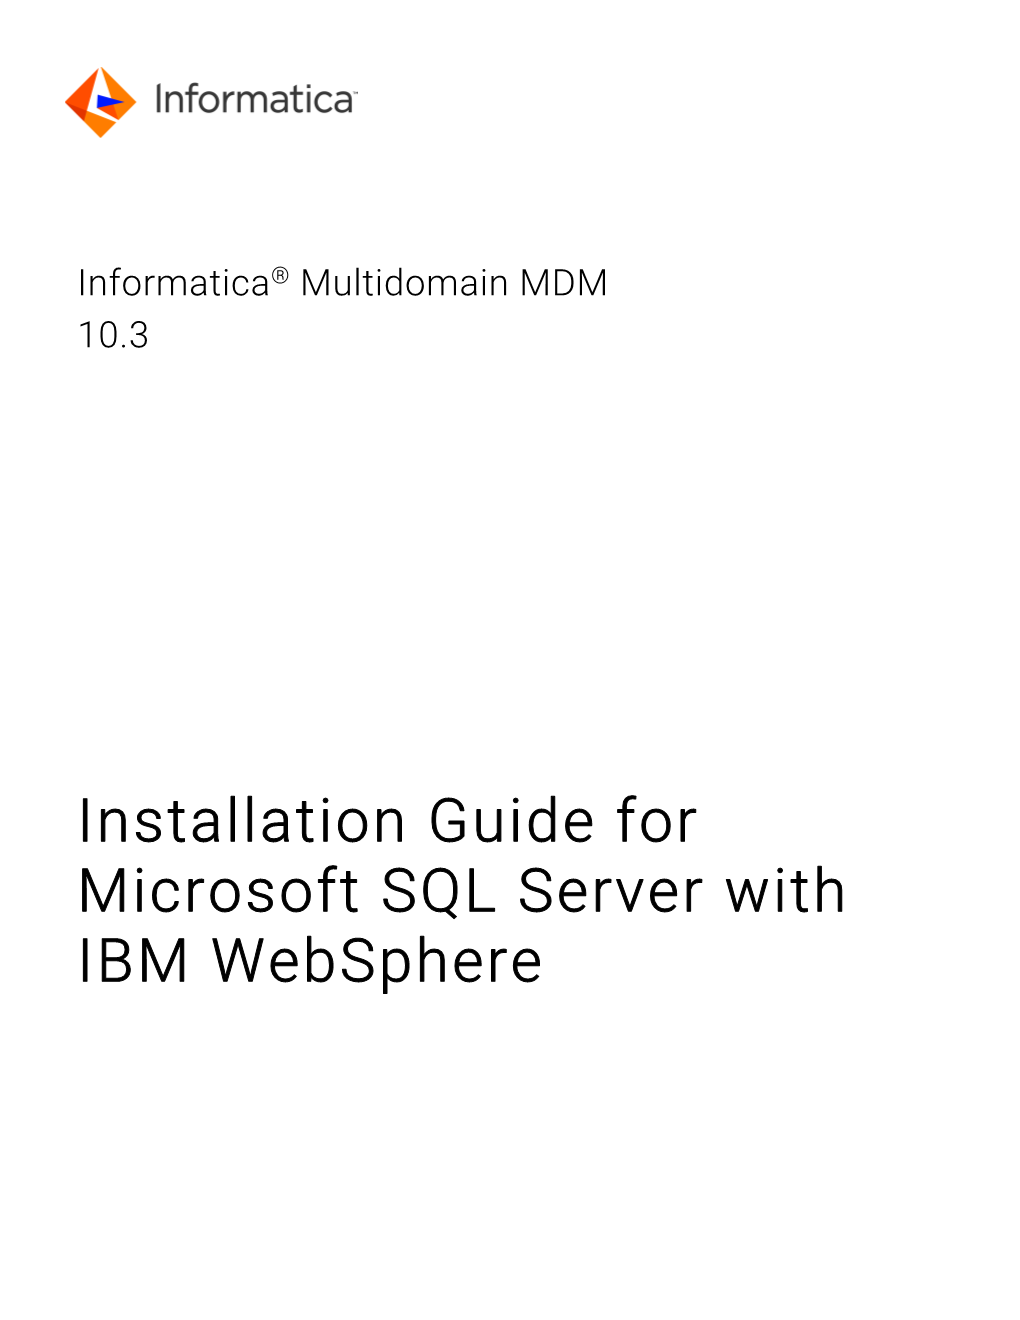 Installation Guide for Microsoft SQL Server with IBM Websphere